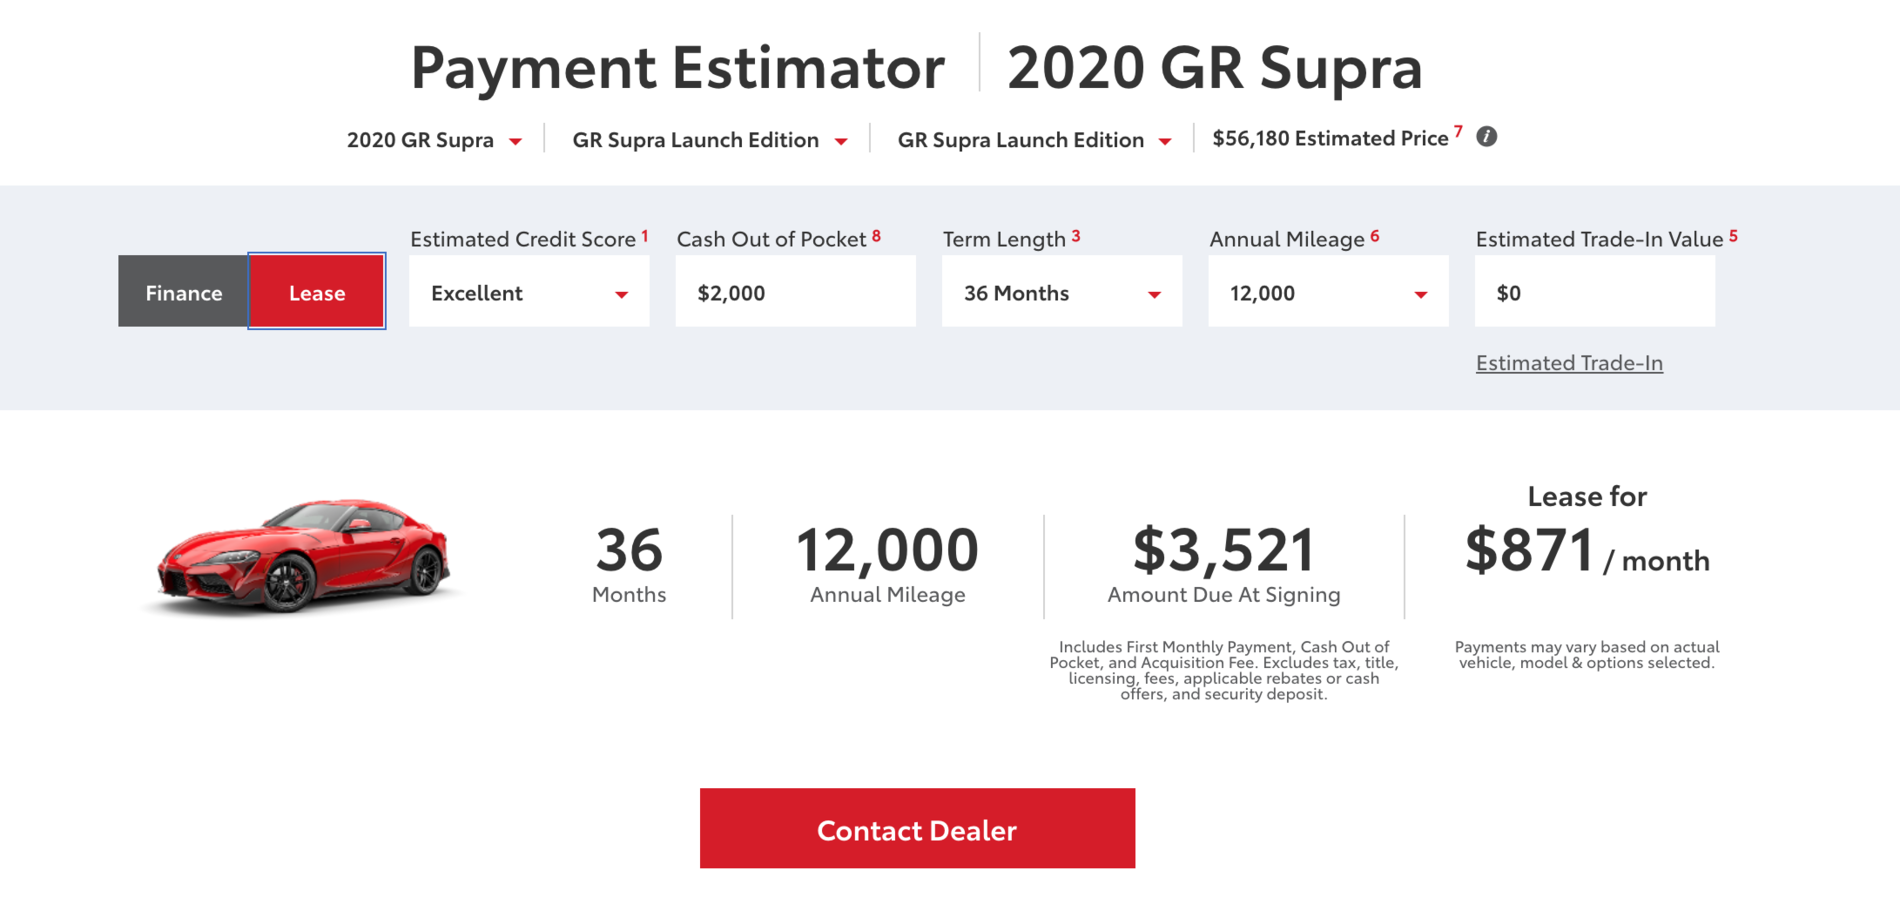 US Bank lease numbers / Leasing options for the Supra